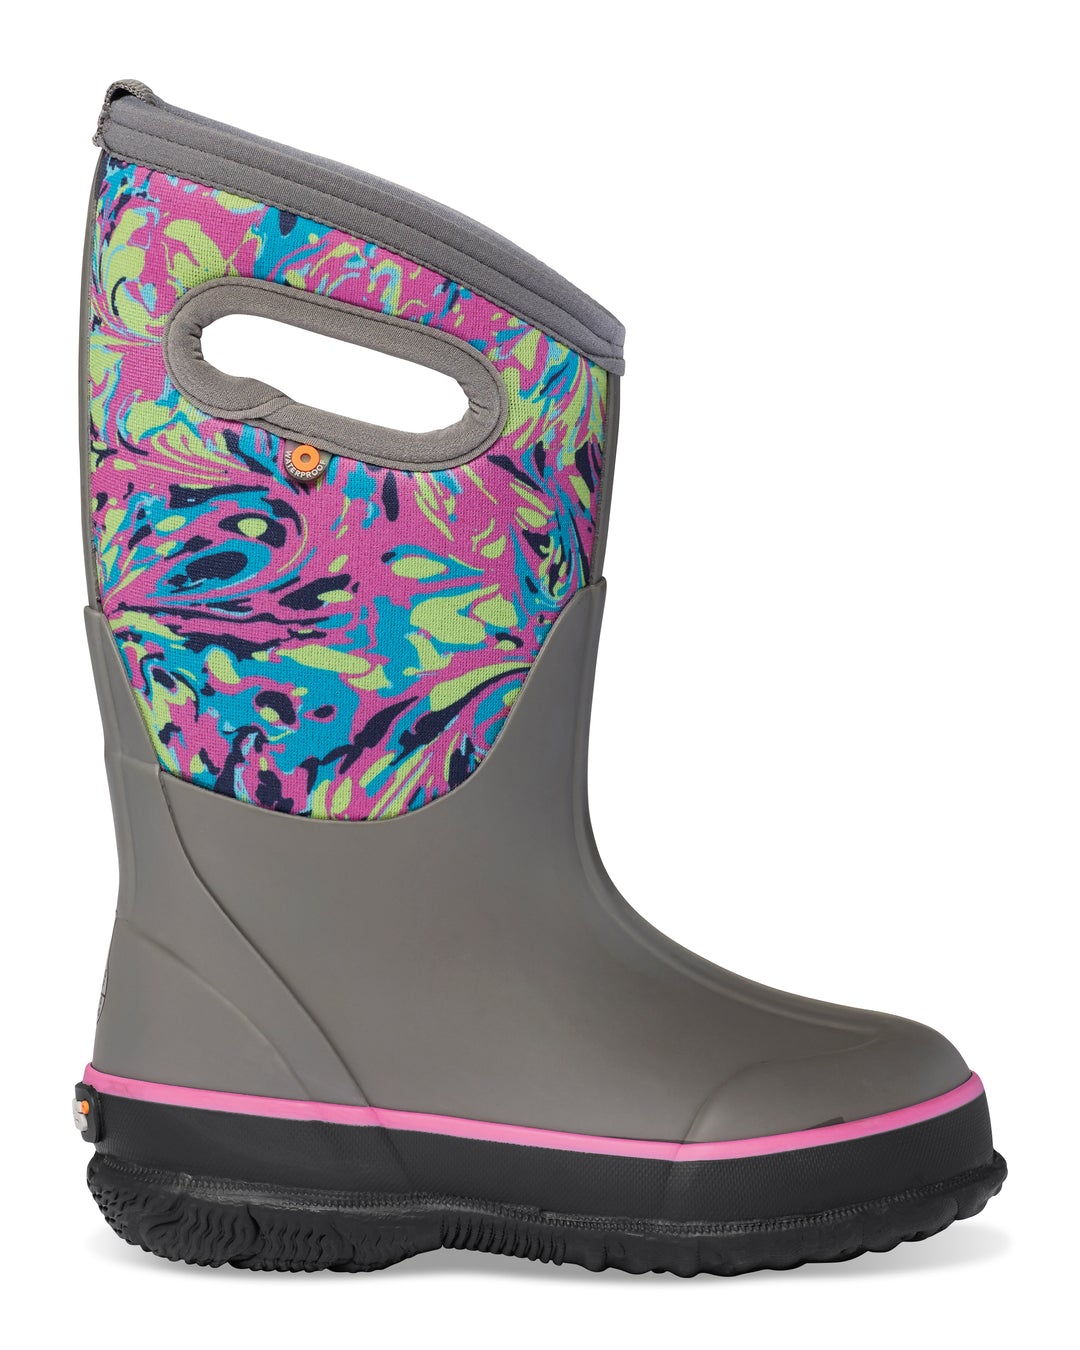 Classic Kid's Marbled Snow Boot - Grey/Pink